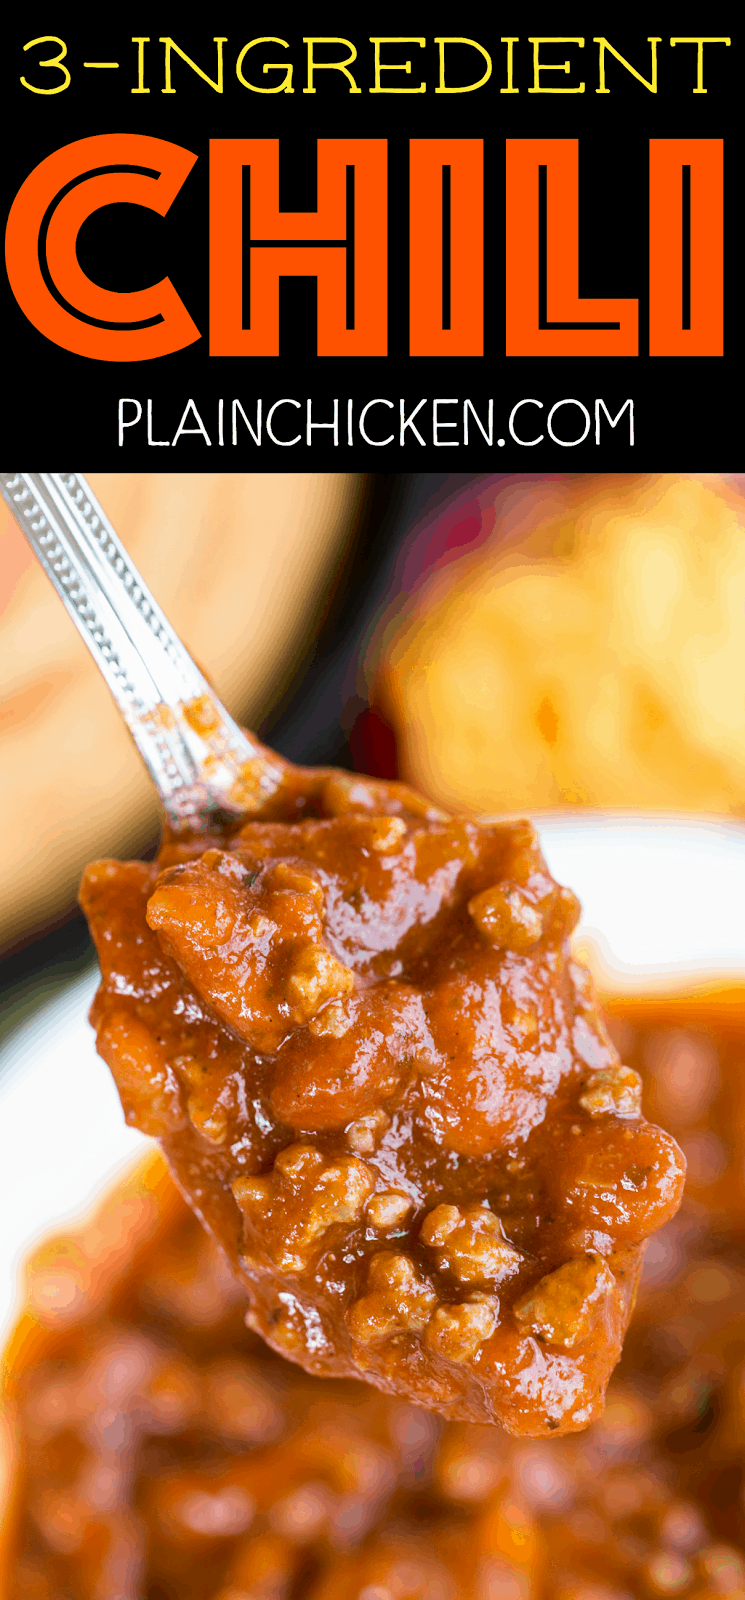 3-Ingredient Chili - ready in 15 minutes! SO easy and everyone loves it! Even picky kids gobble this up! Top chili with your favorite fixings or serve on top of french fries. Seriously delicious. A new family favorite!